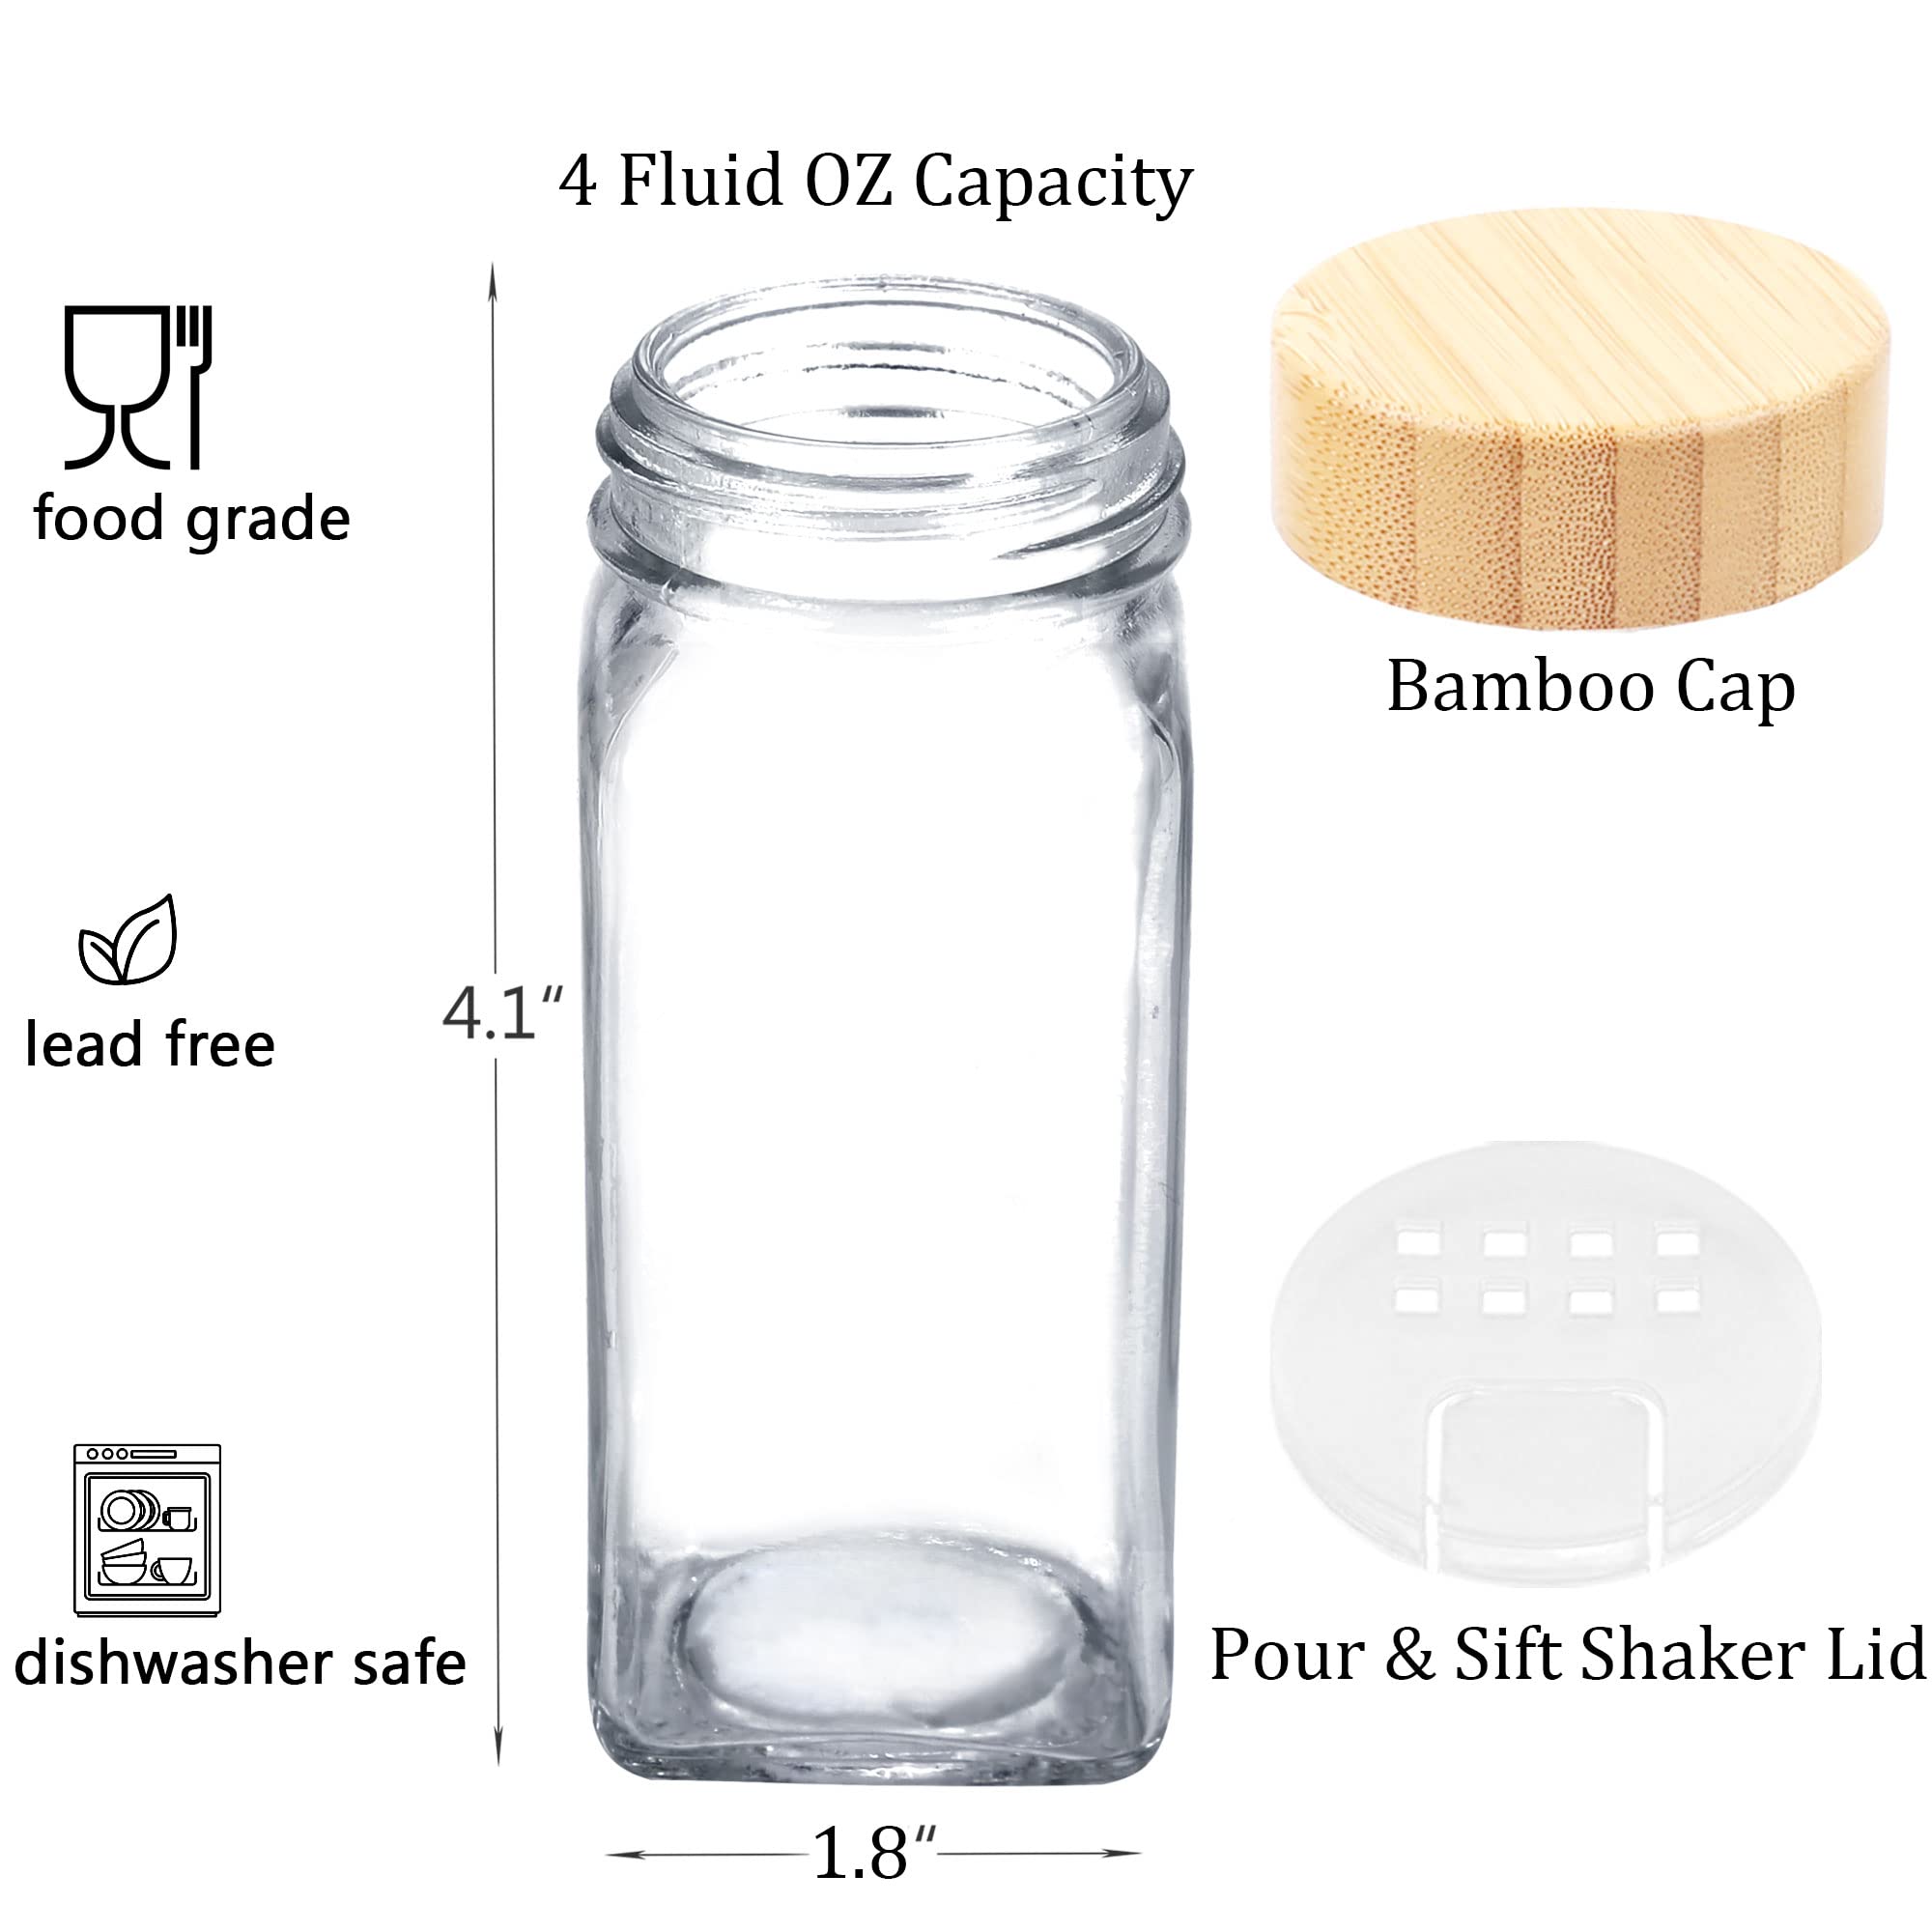 SWOMMOLY 48 Glass Spice Jars with 806 White Spice Labels, Square Spice Bottles 4 oz Empty Spice Containers with Bamboo Lids, Chalk Marker and Funnel Complete Set.